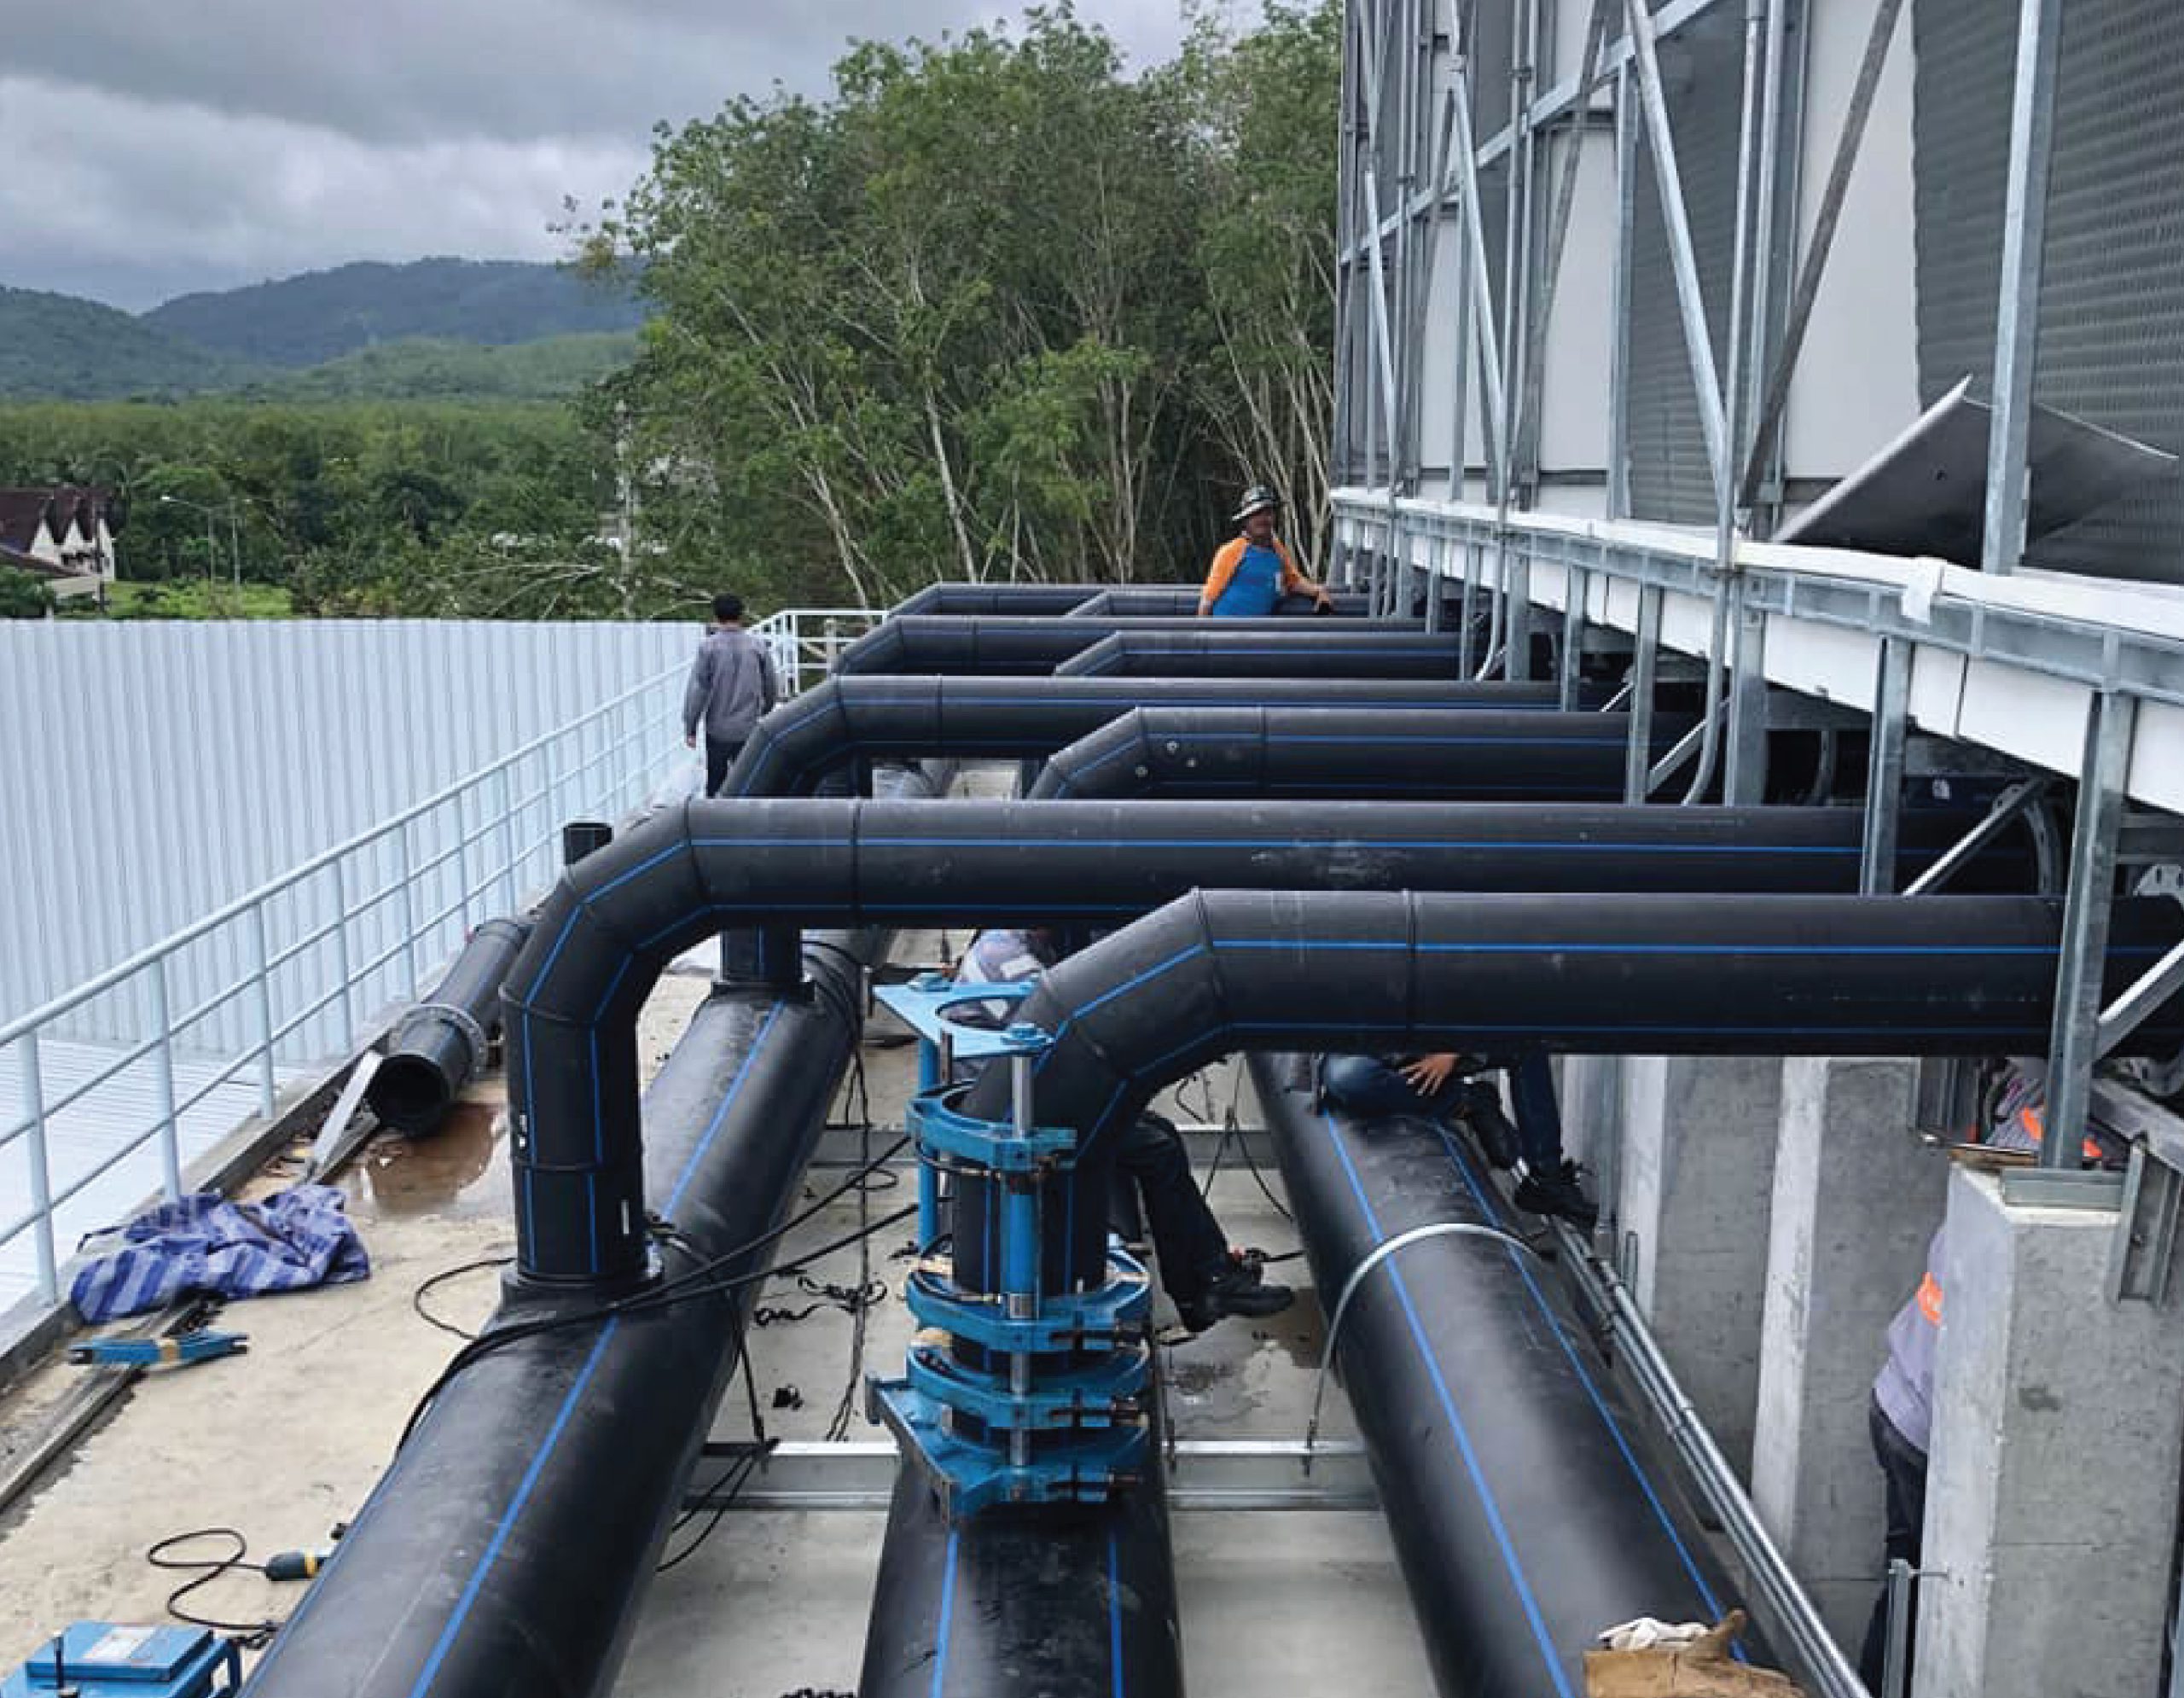 HDPE piping system in cooling system installed at Robinson Phuket